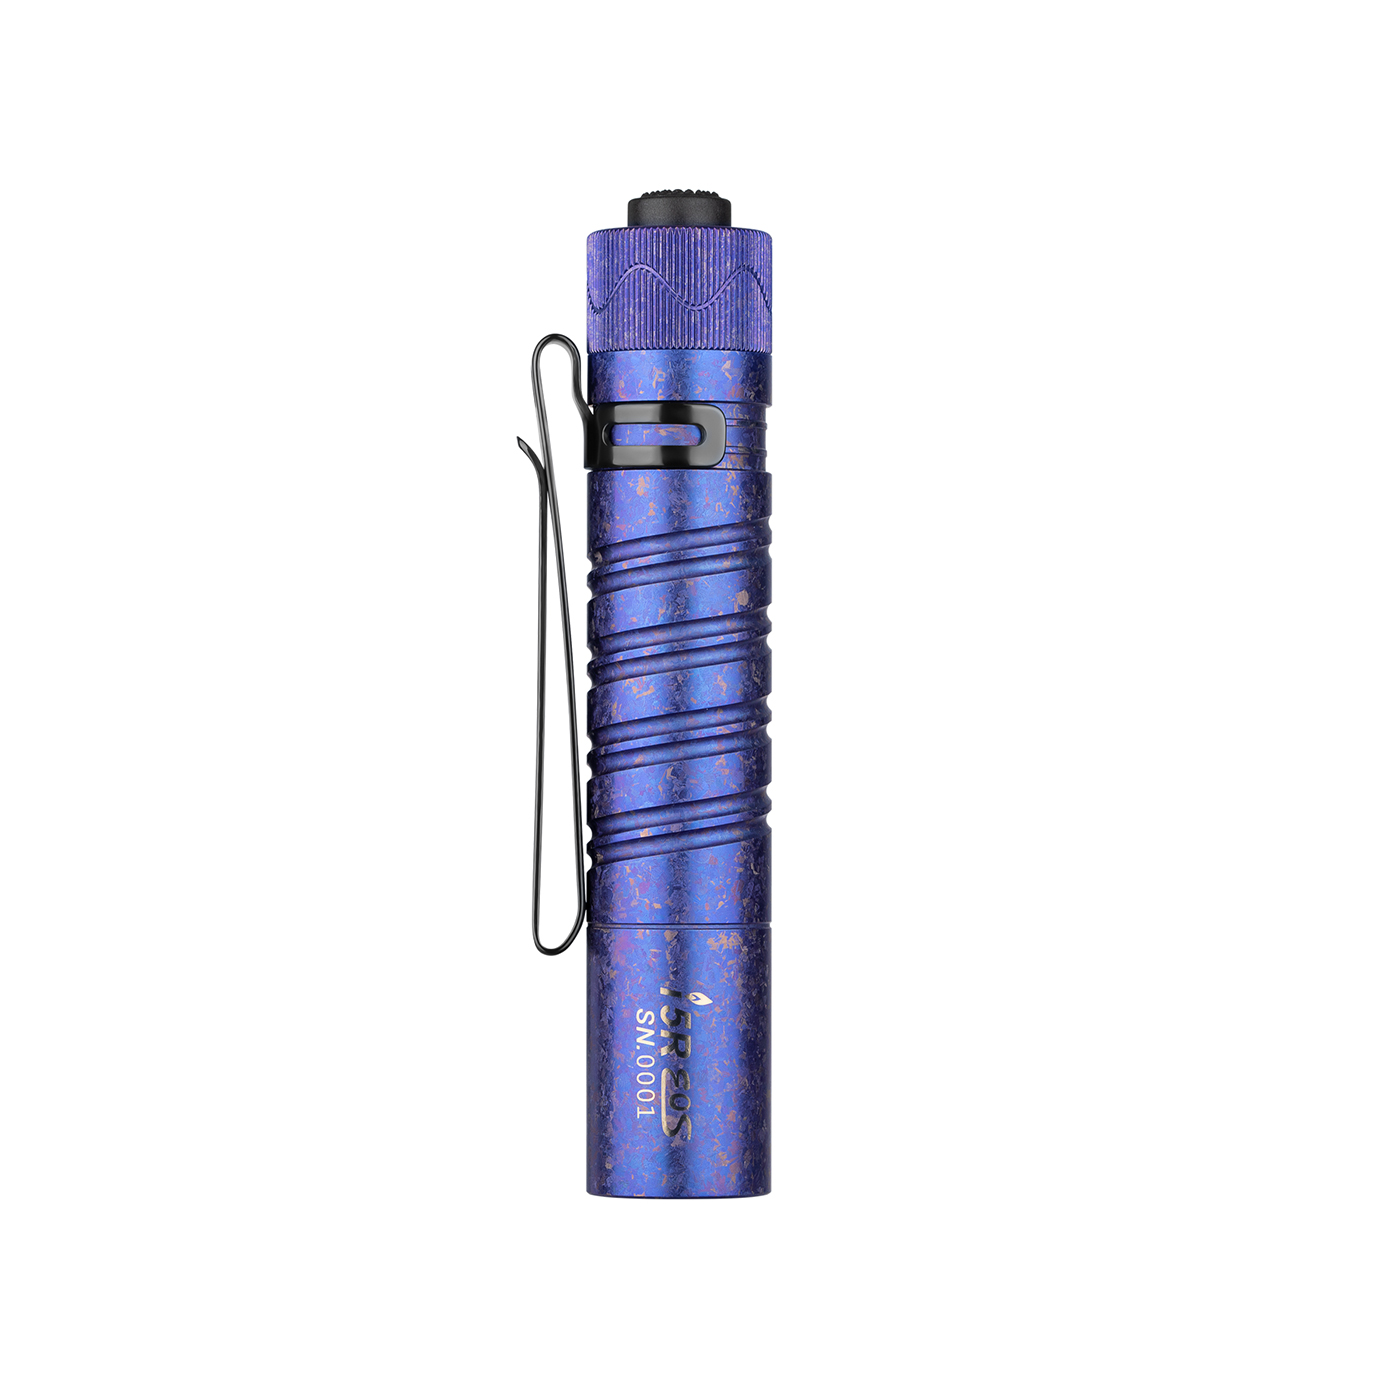 Olight I5R EOS Ice Flower Periwinkle Limited Edition